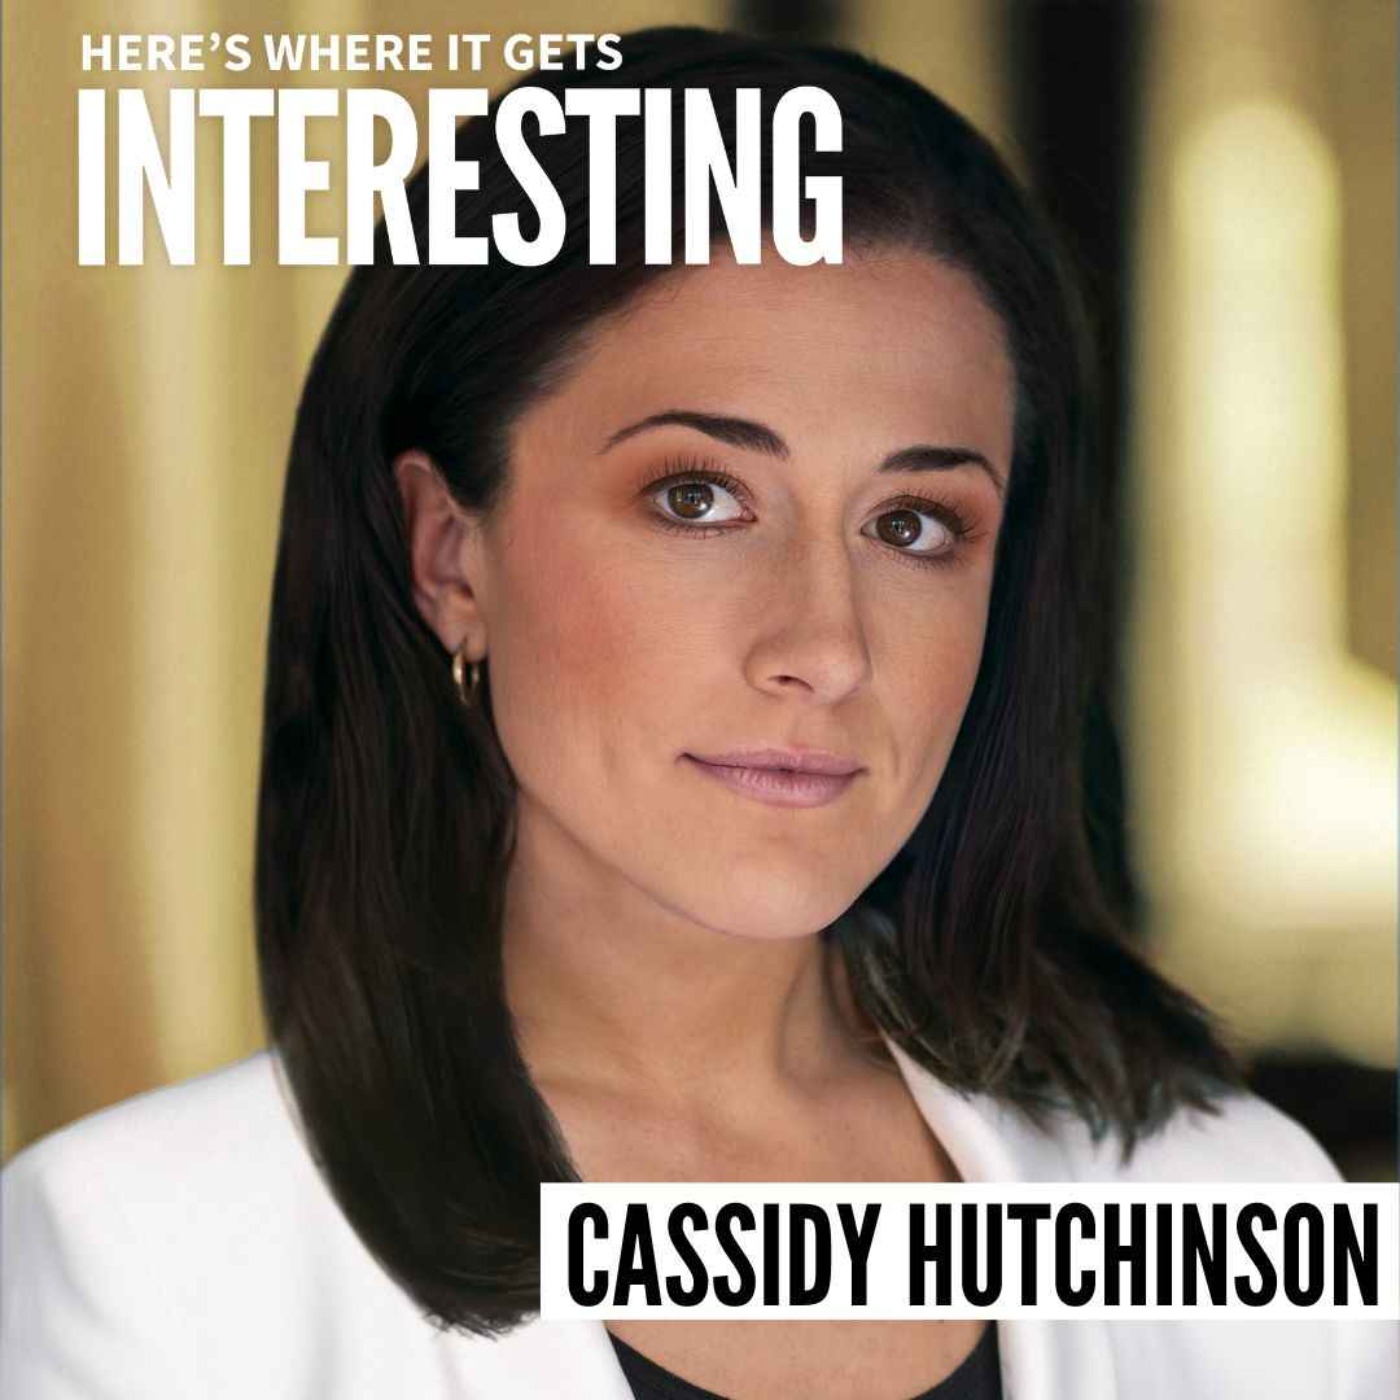 Enough with Cassidy Hutchinson